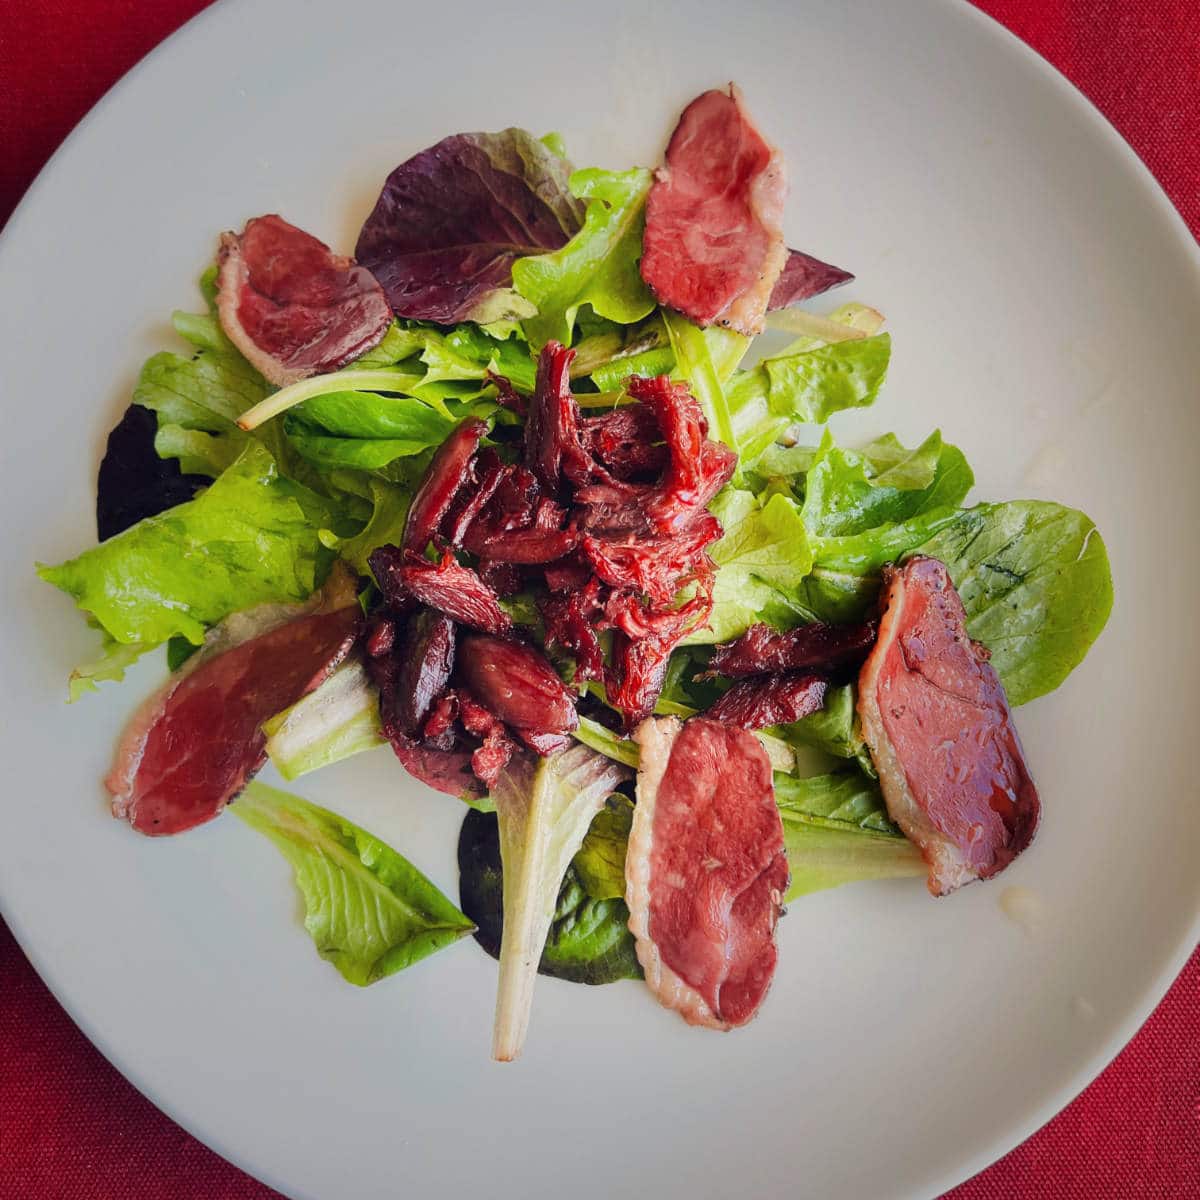 Read more about the article Périgord salad (Landaise salad) with gizzards